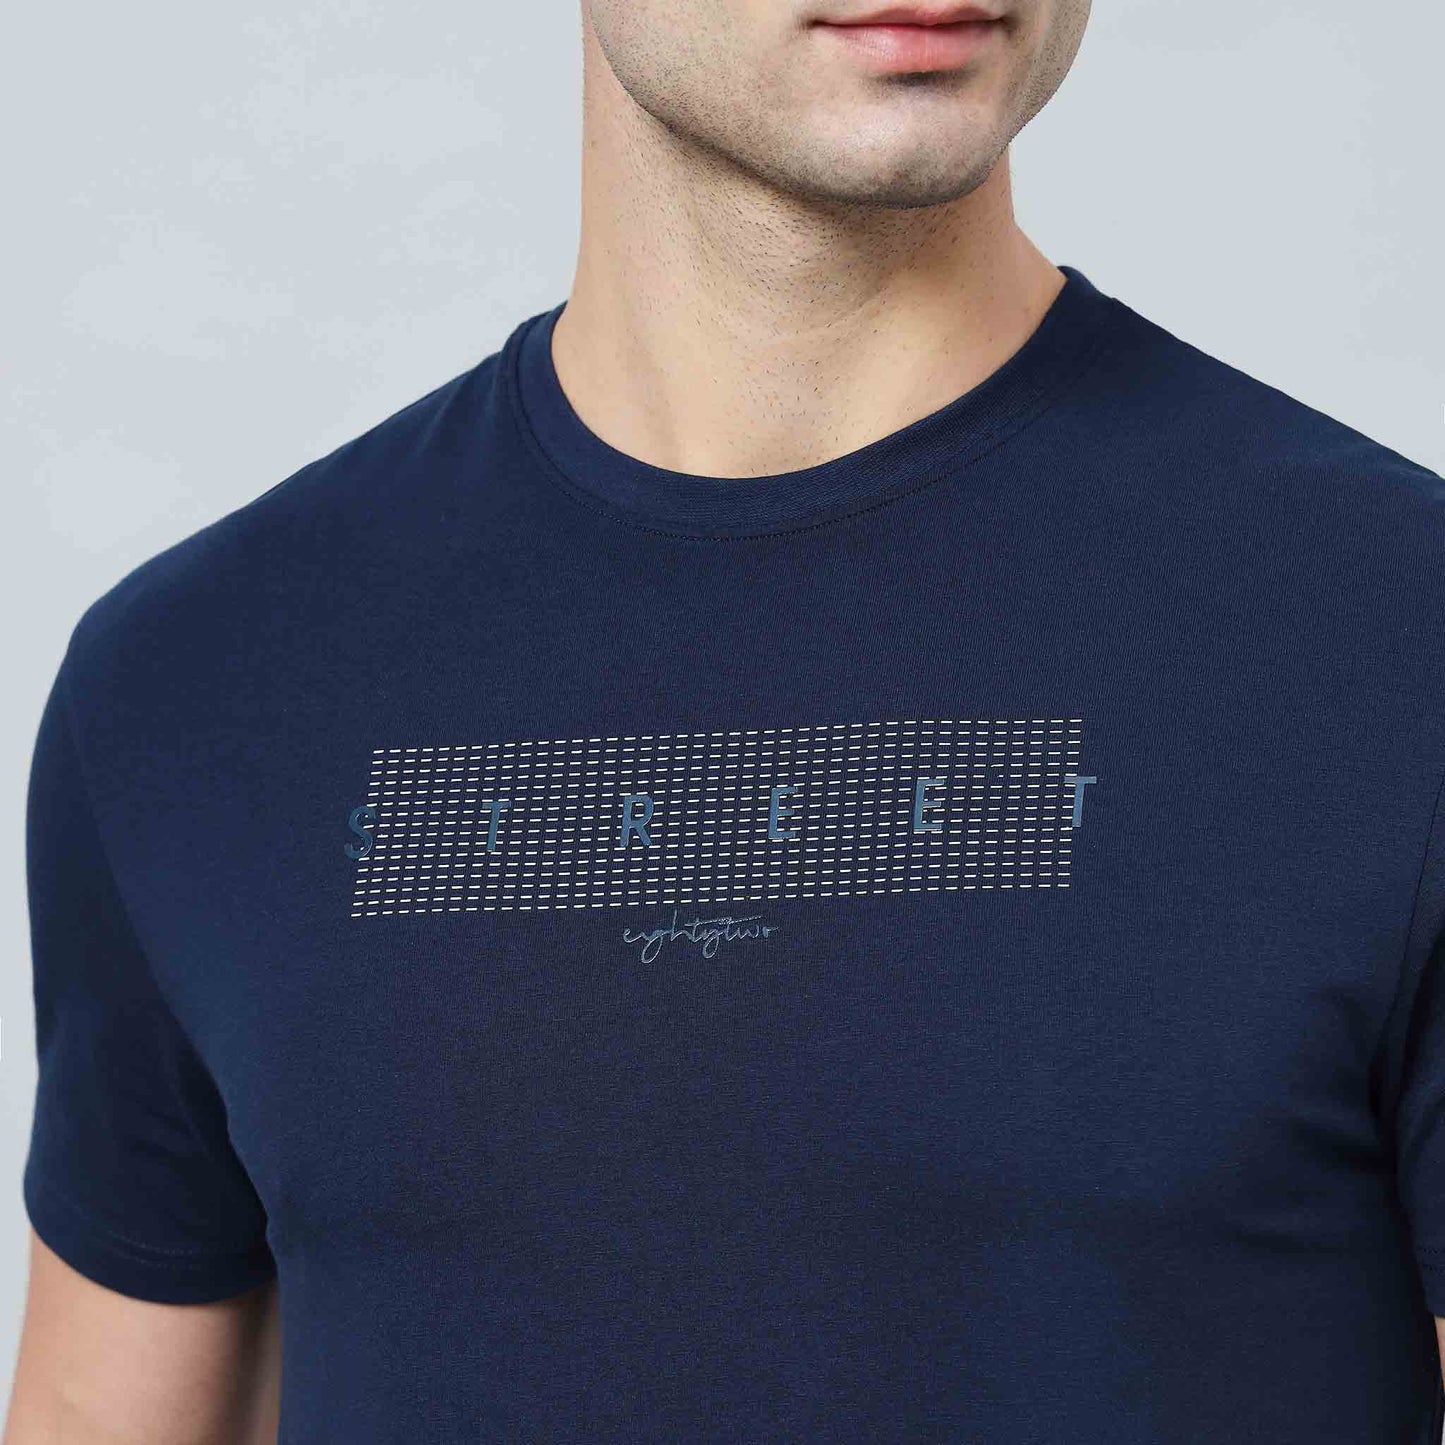 Regular T-shirt - Front silicon print